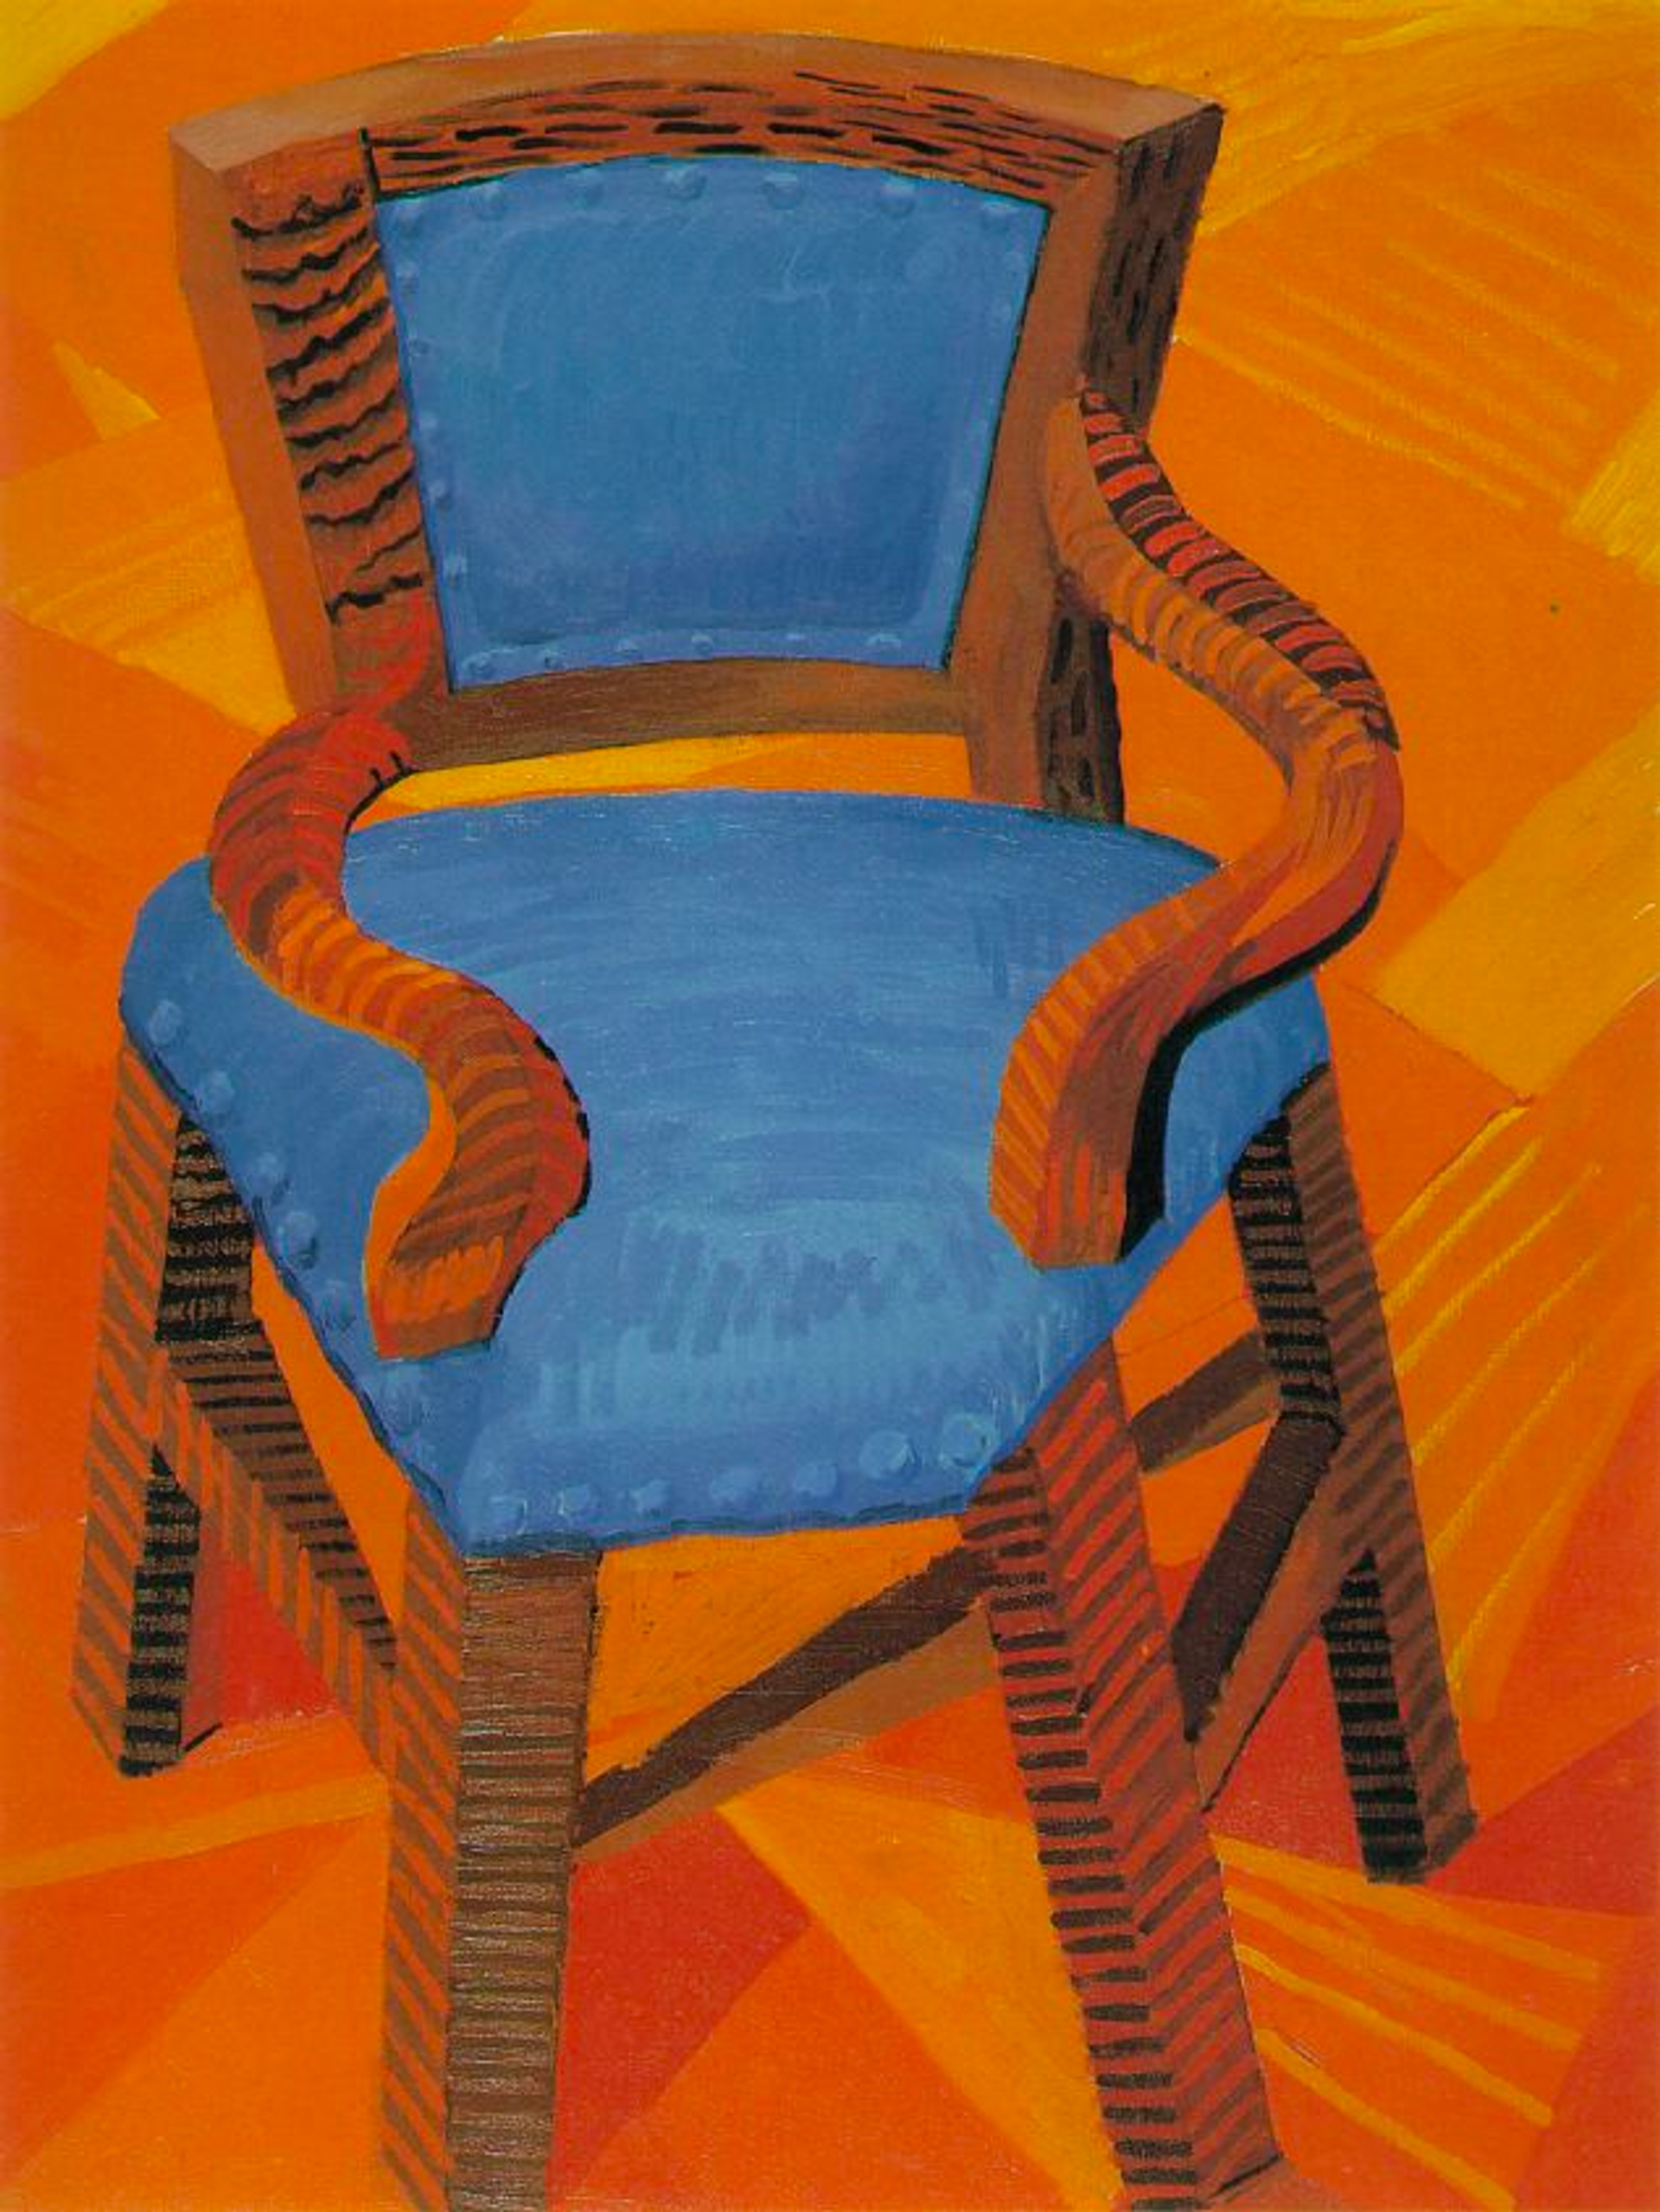 A chair with blue cushioning and wooden legs on a vibrant orange background.